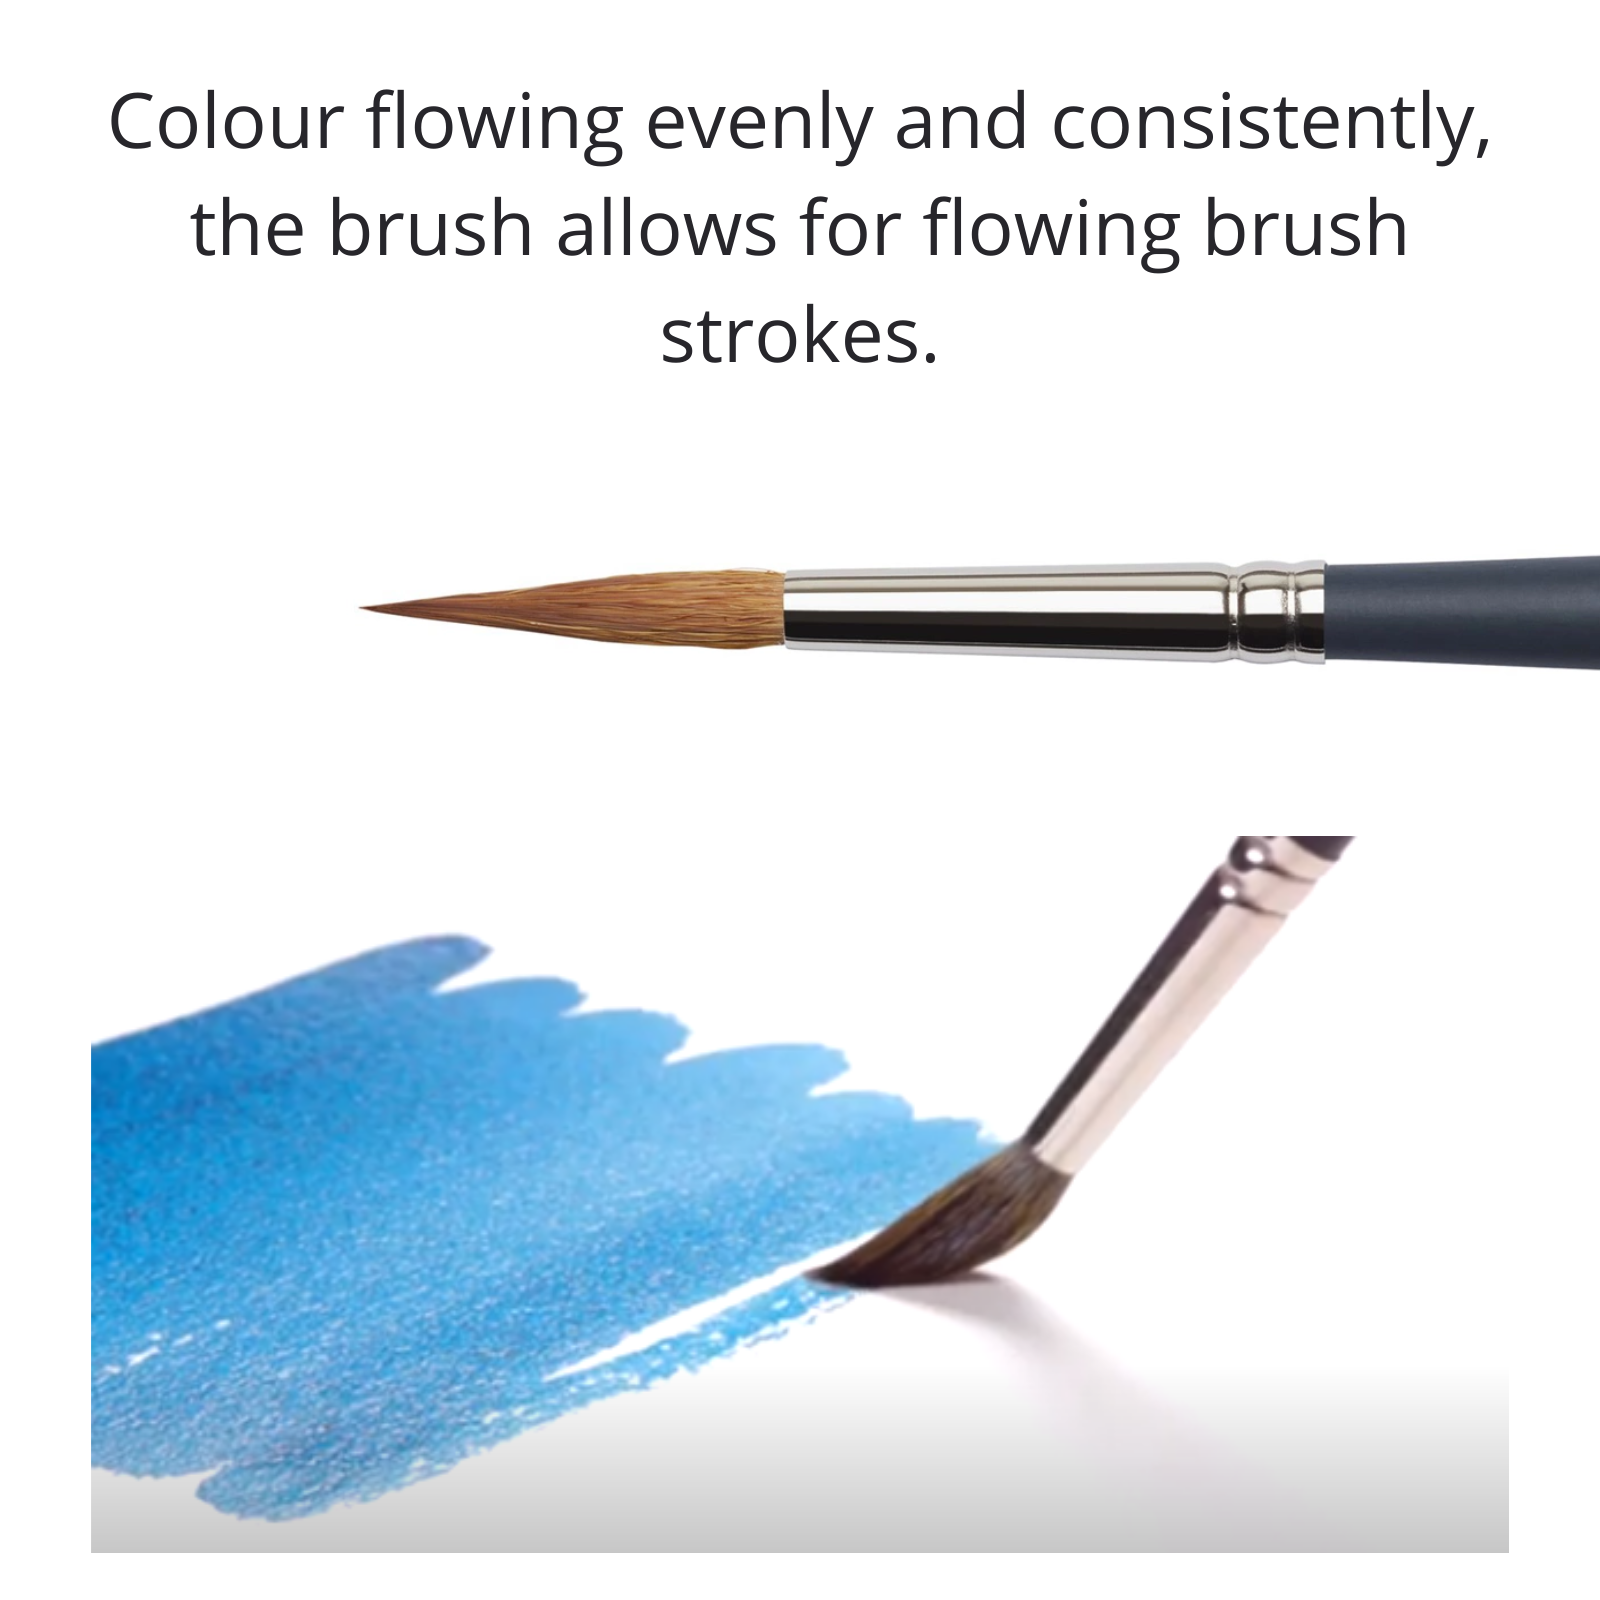 Winsor and Newton Professional Watercolour Paintbrushes, Synthetic Sable Brushes - Innovative synthetic bristle blend